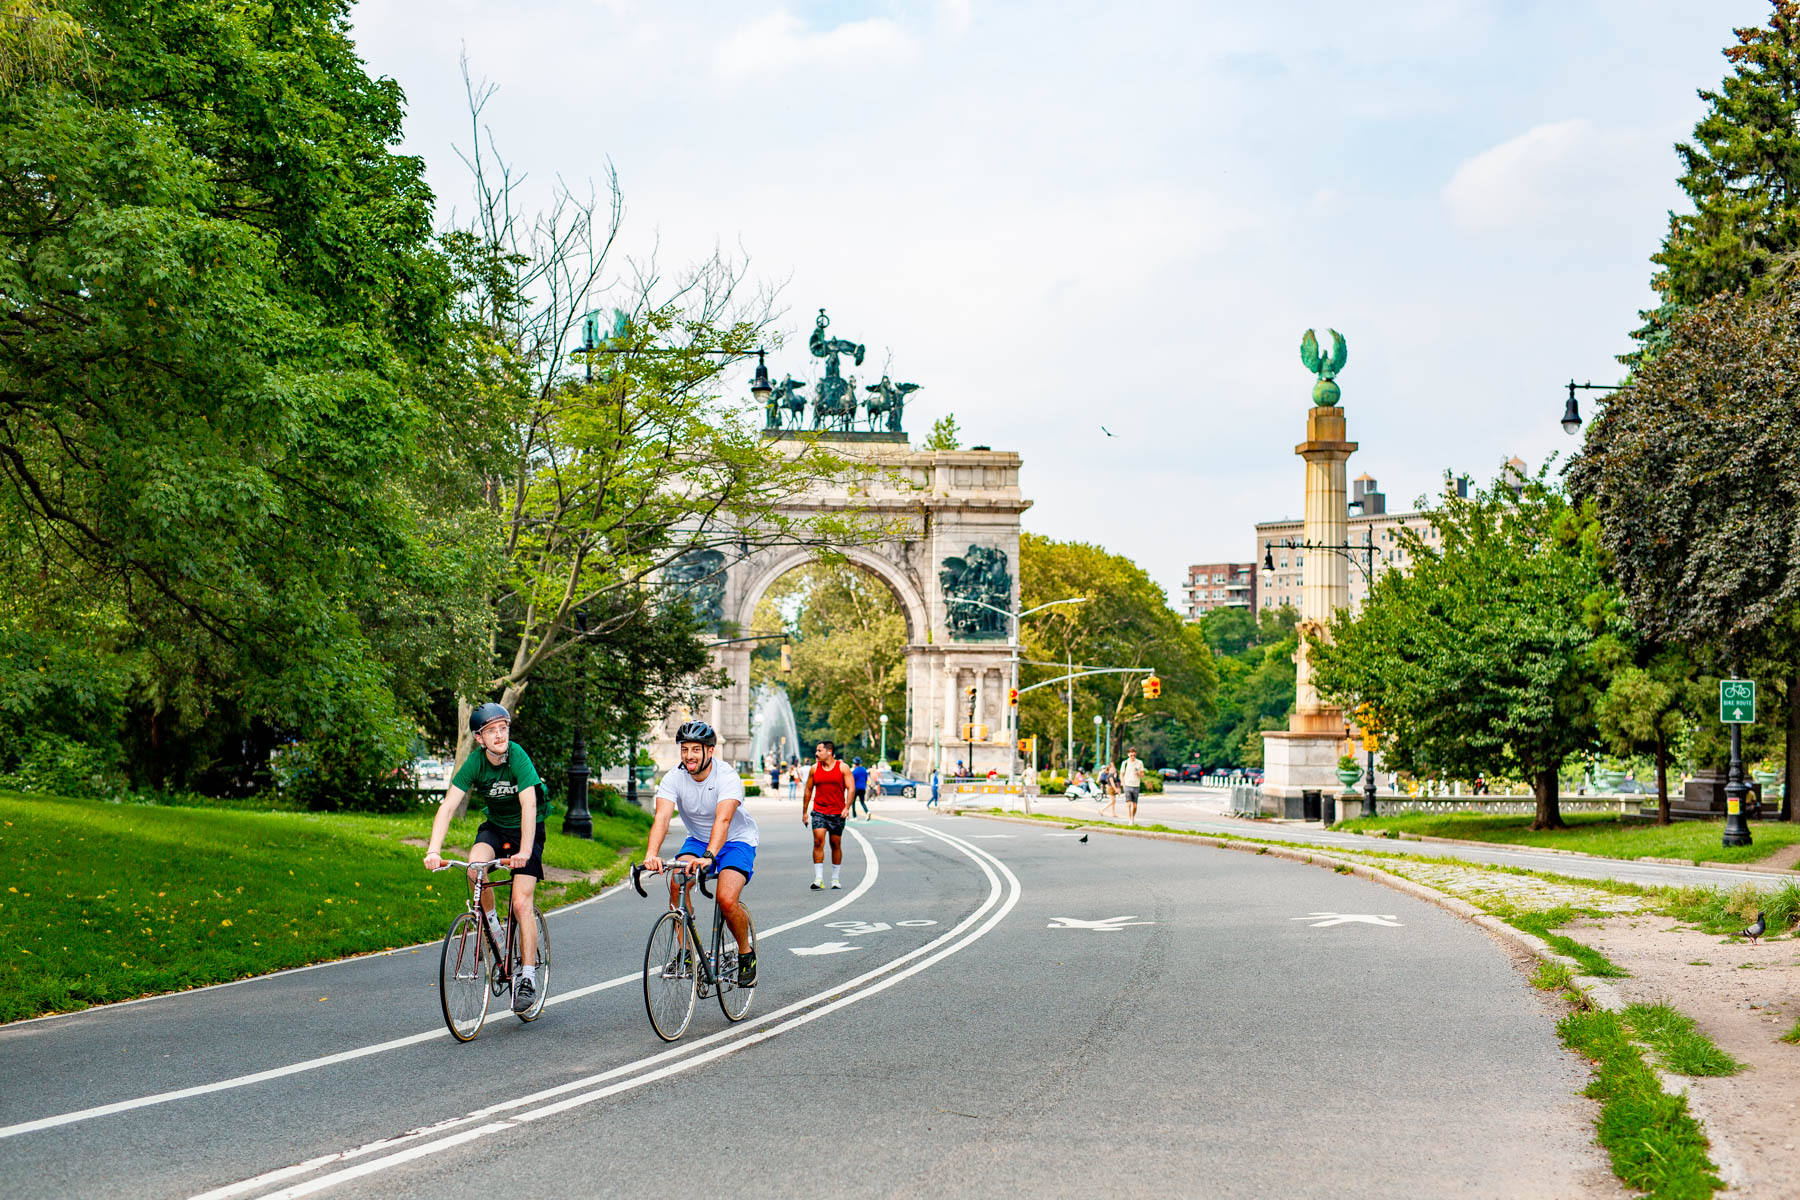 Prospect Park NYC
Best parks in New York City